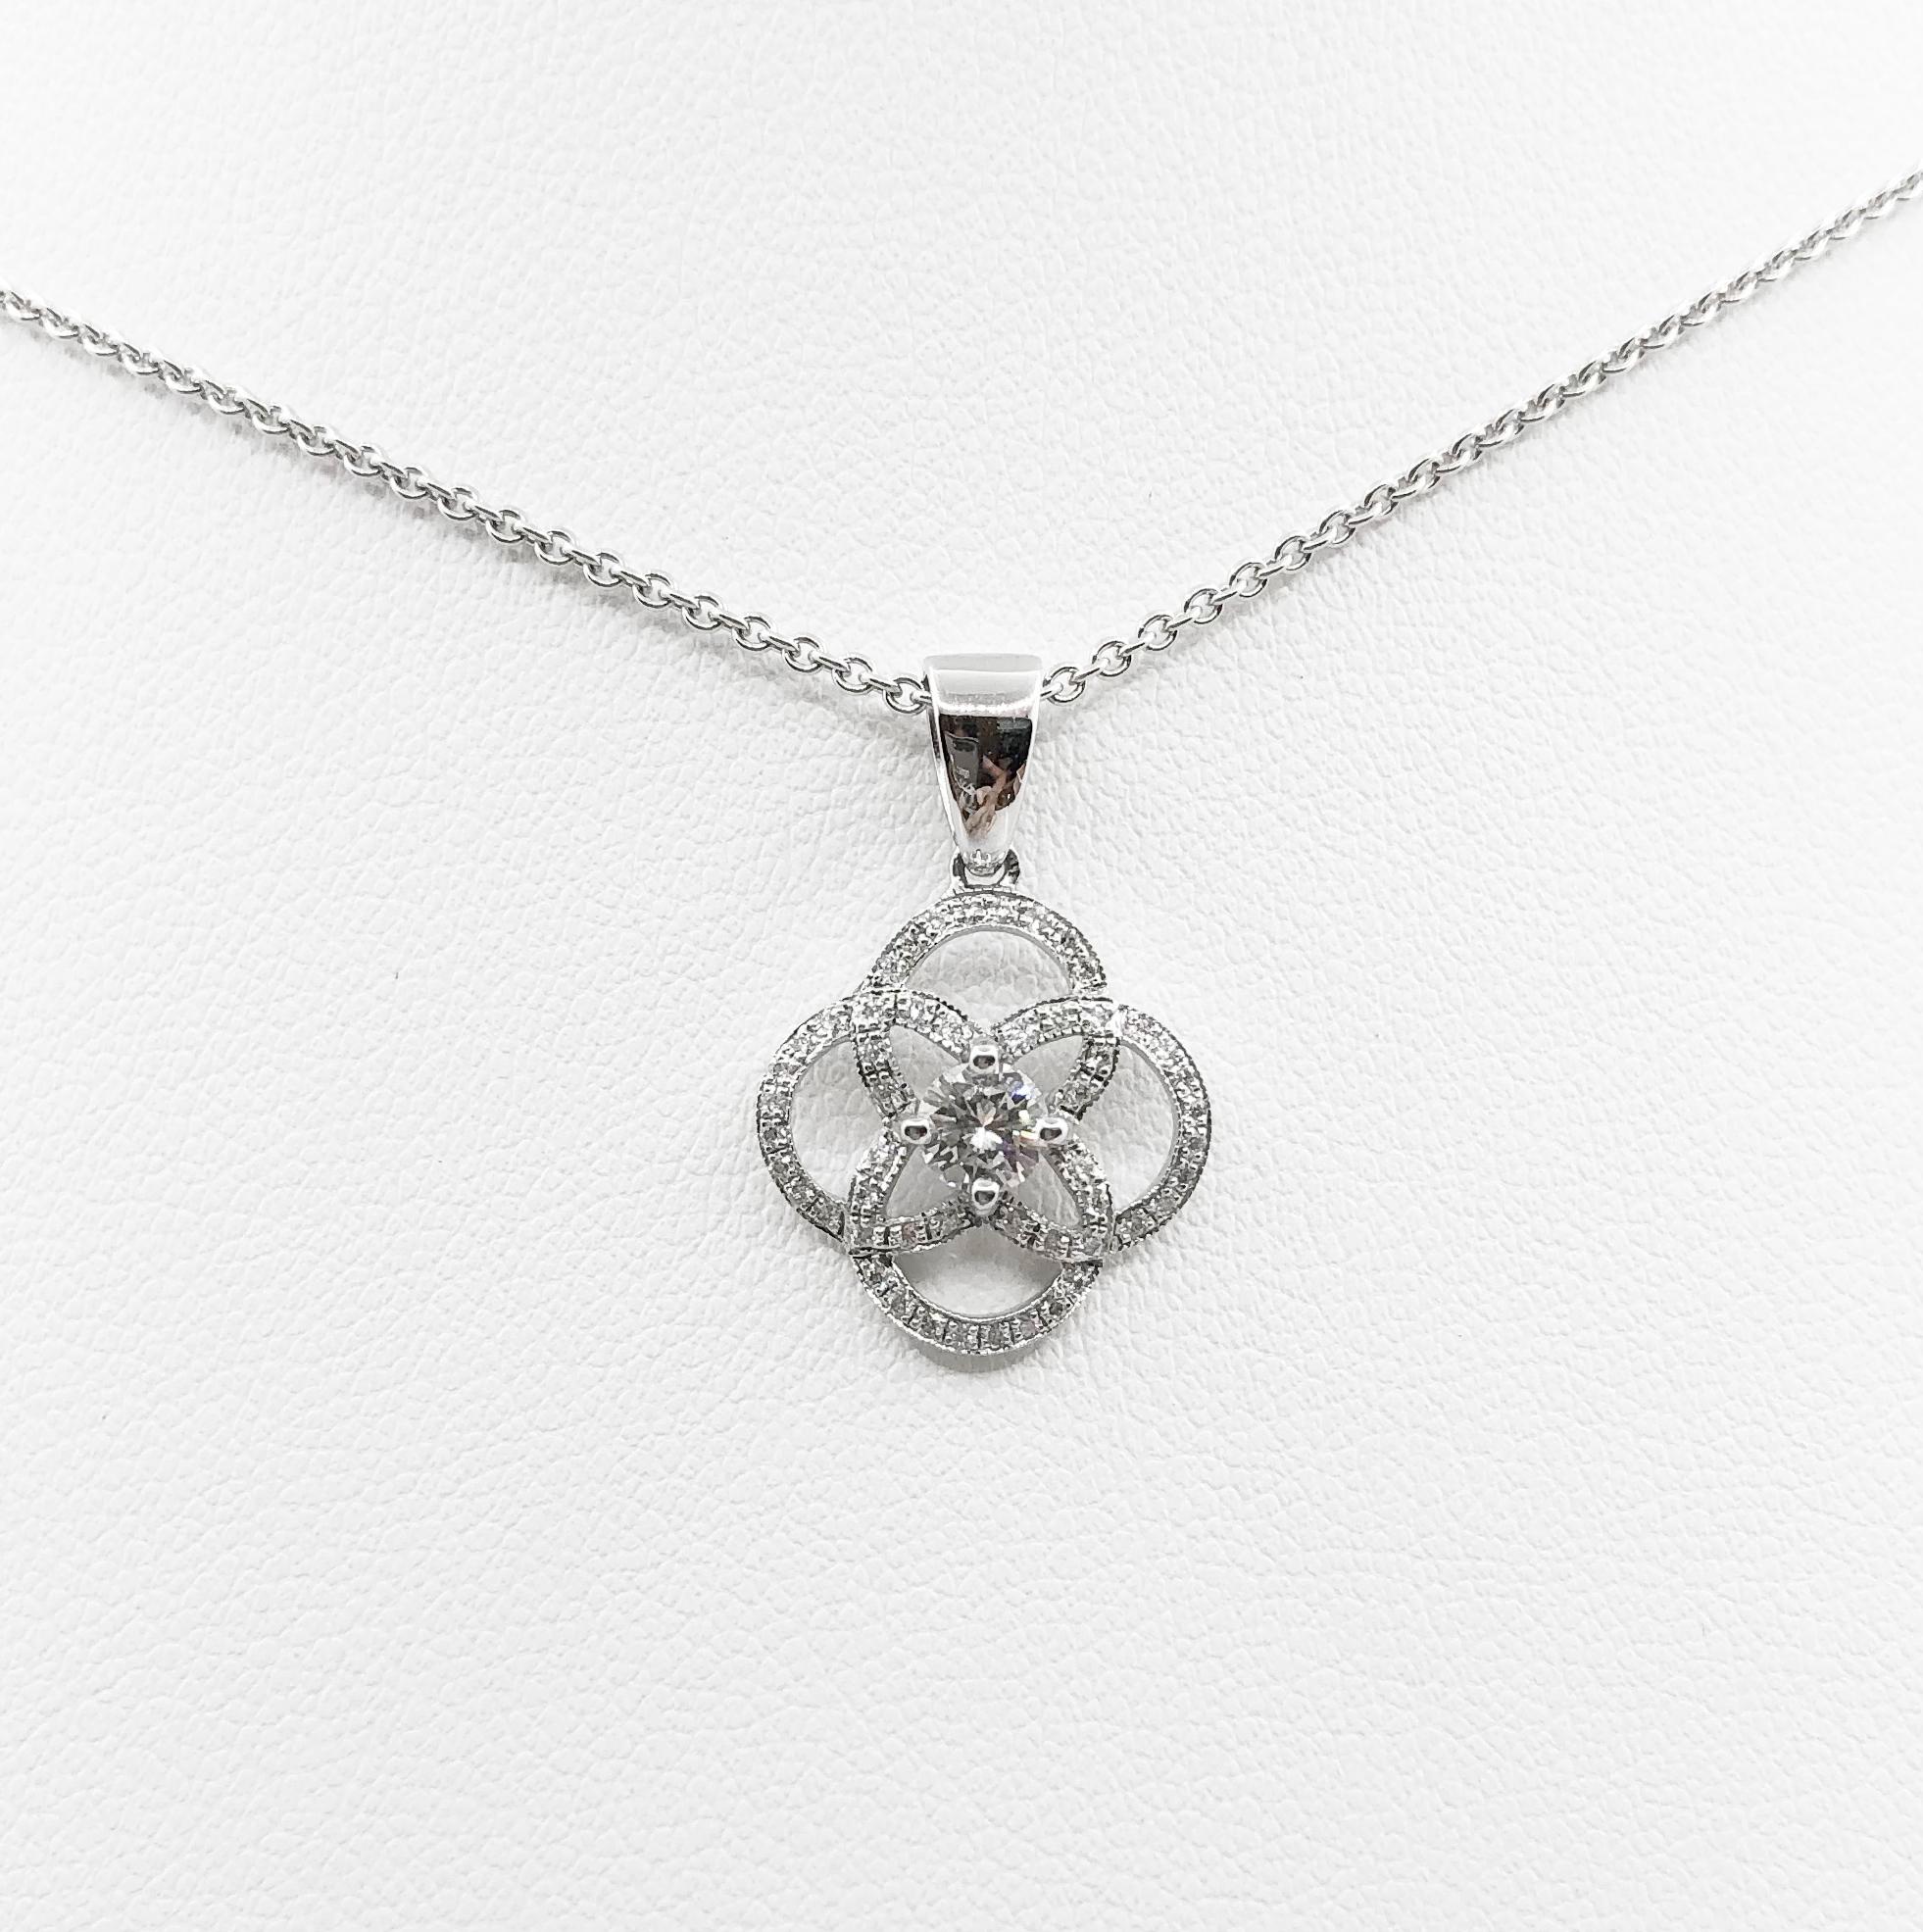 Diamond 0.36 carat Pendant set in 18 Karat White Gold Settings
(chain not included)

Width: 1.4 cm 
Length: 2.2 cm
Total Weight: 1.61 grams

